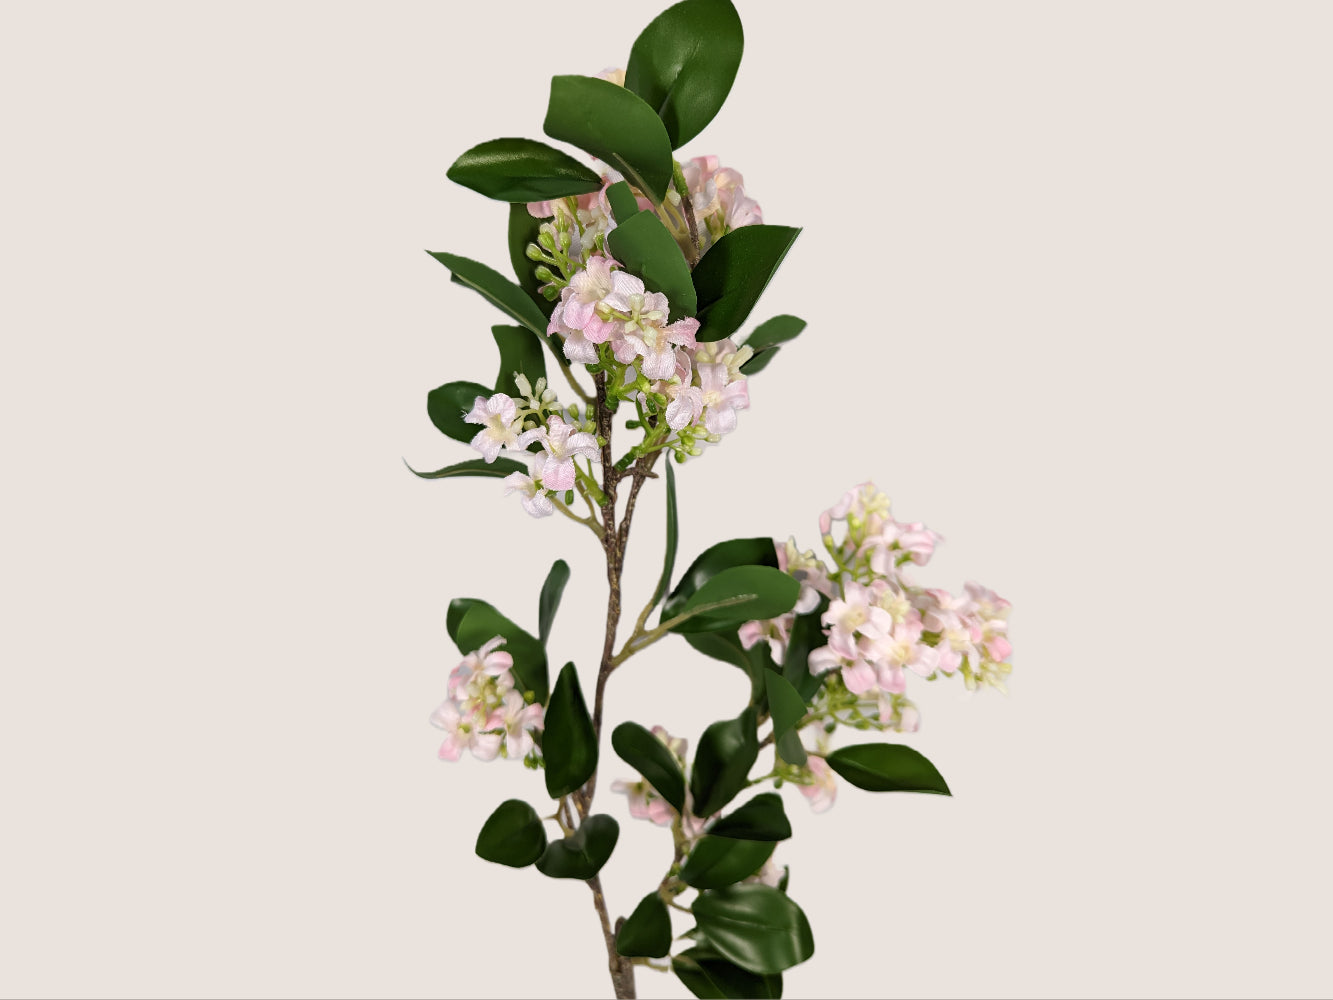 Image of an artificial lilac stem that stands 30 inches tall, featuring lifelike details such as white, pink, and light green petals with dark brown stem. The buds are light green and the stem has realistic texture and detailing. The stem is shown against a neutral beige background.